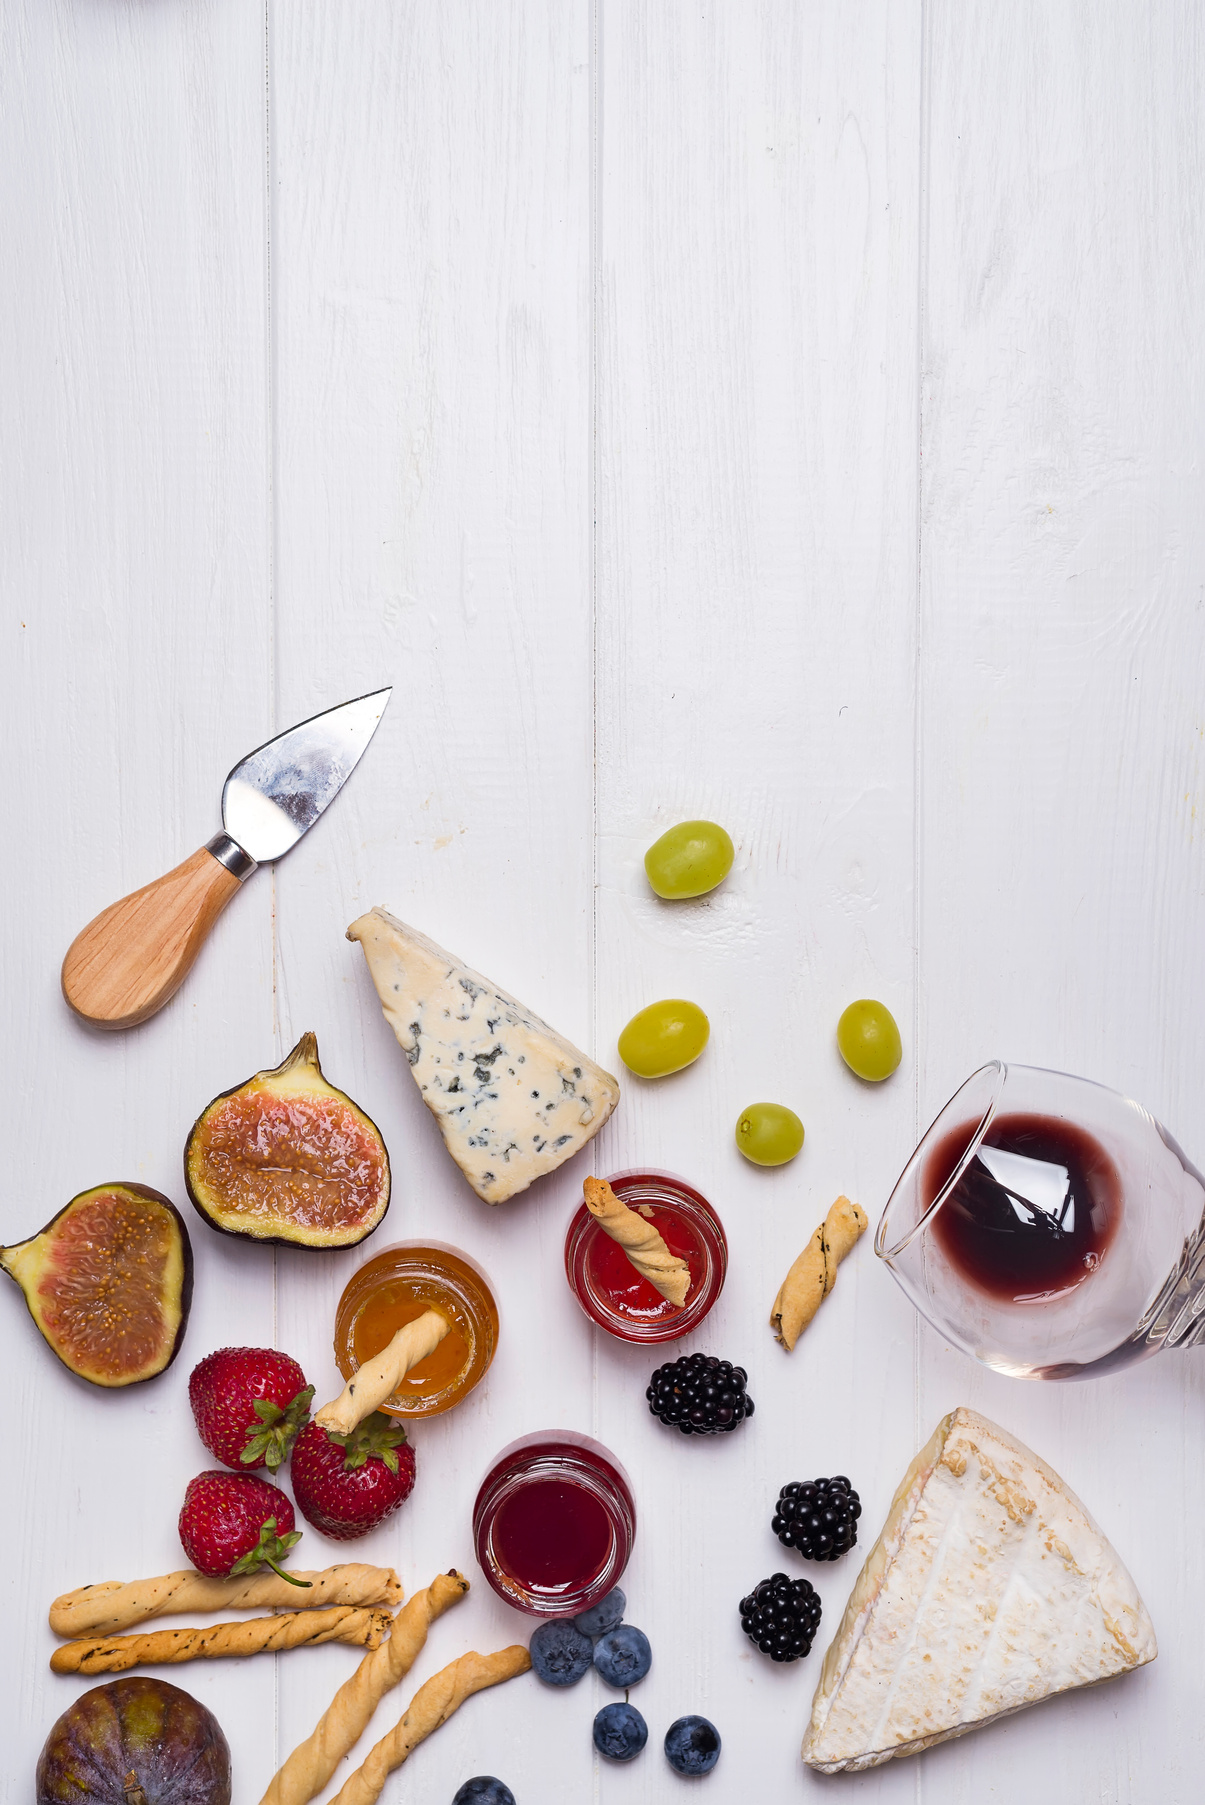 Winery Concept with Cheese and Fruits on White Wooden Background